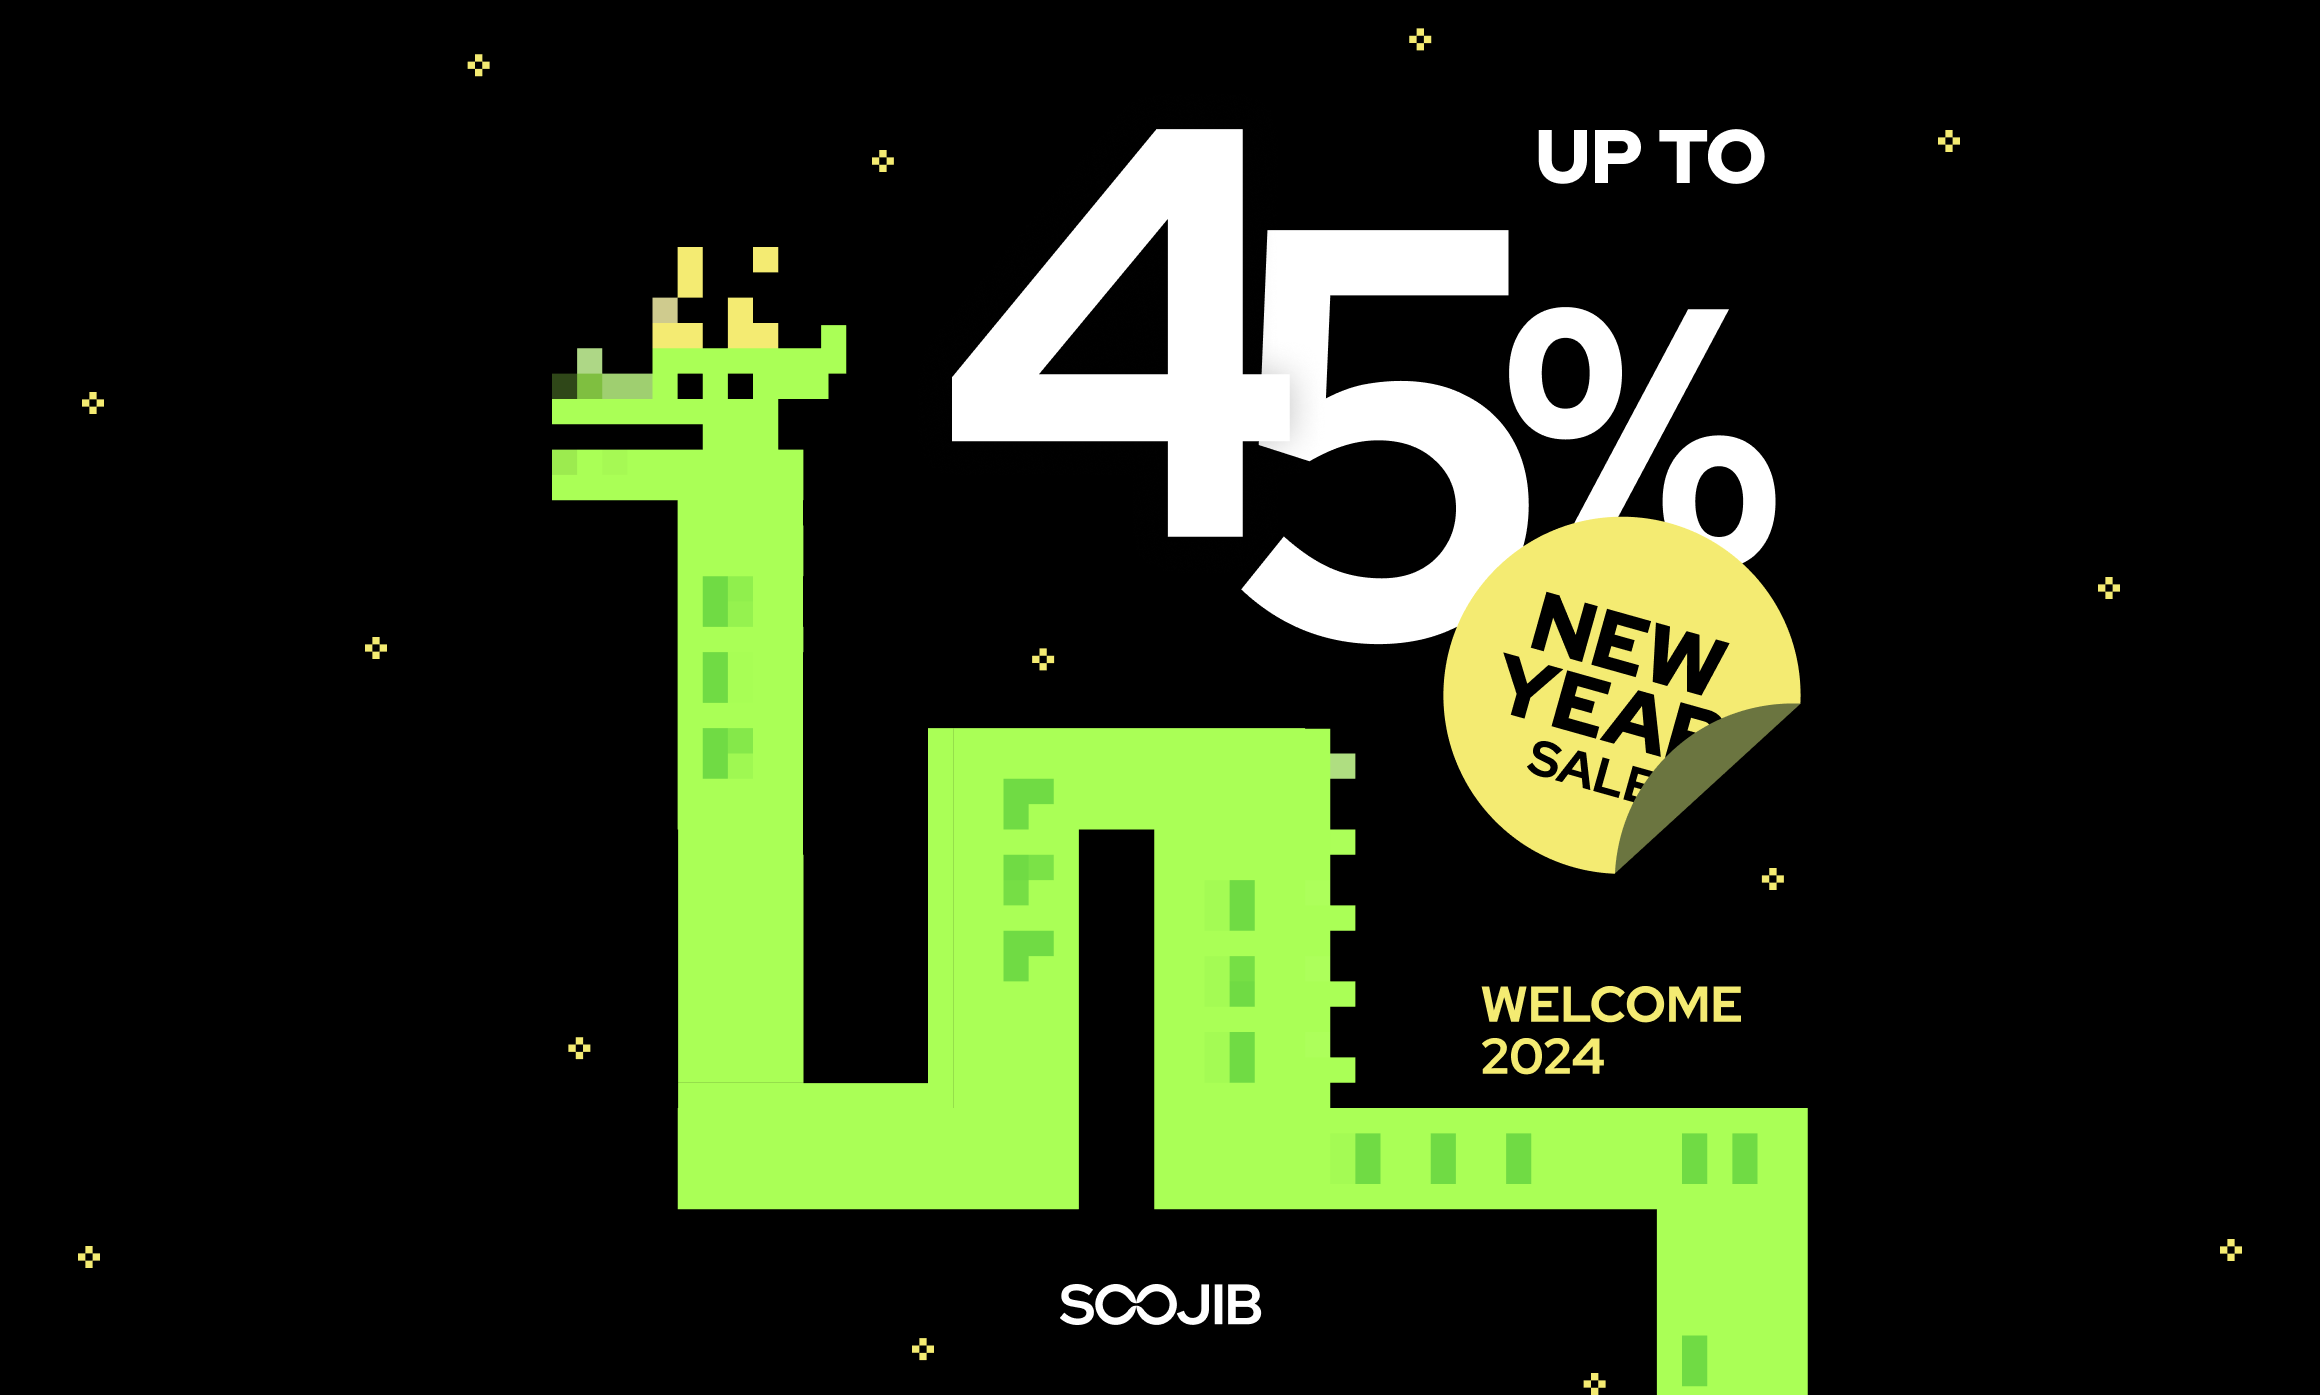 🐲New Year, New Savings - Up to 45% OFF!